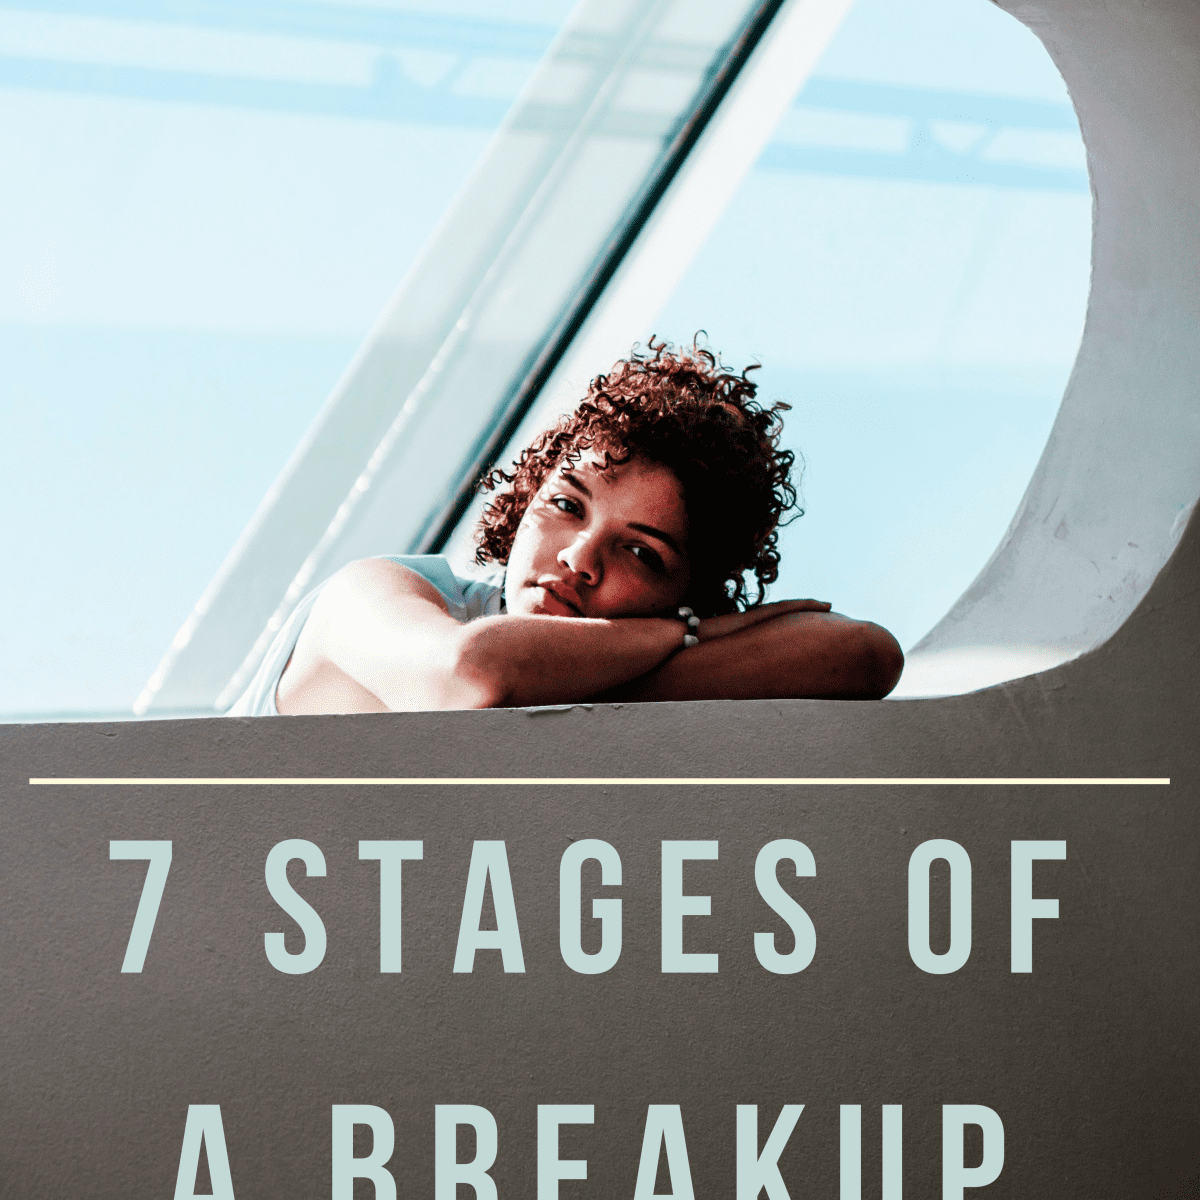 Stages after breaking up with someone